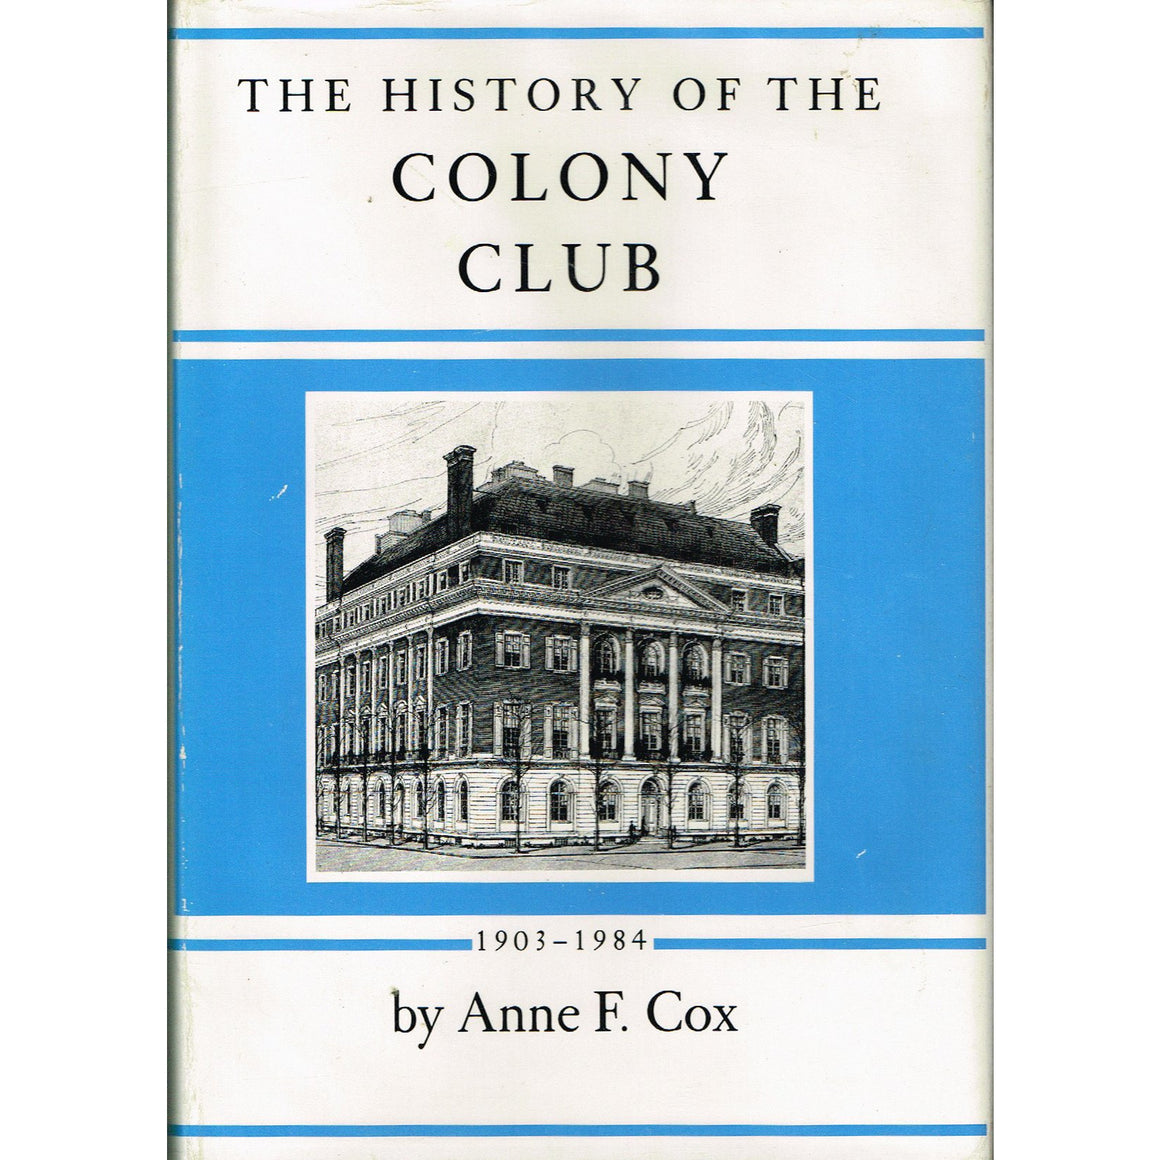 The History of the Colony Club 1903-1984